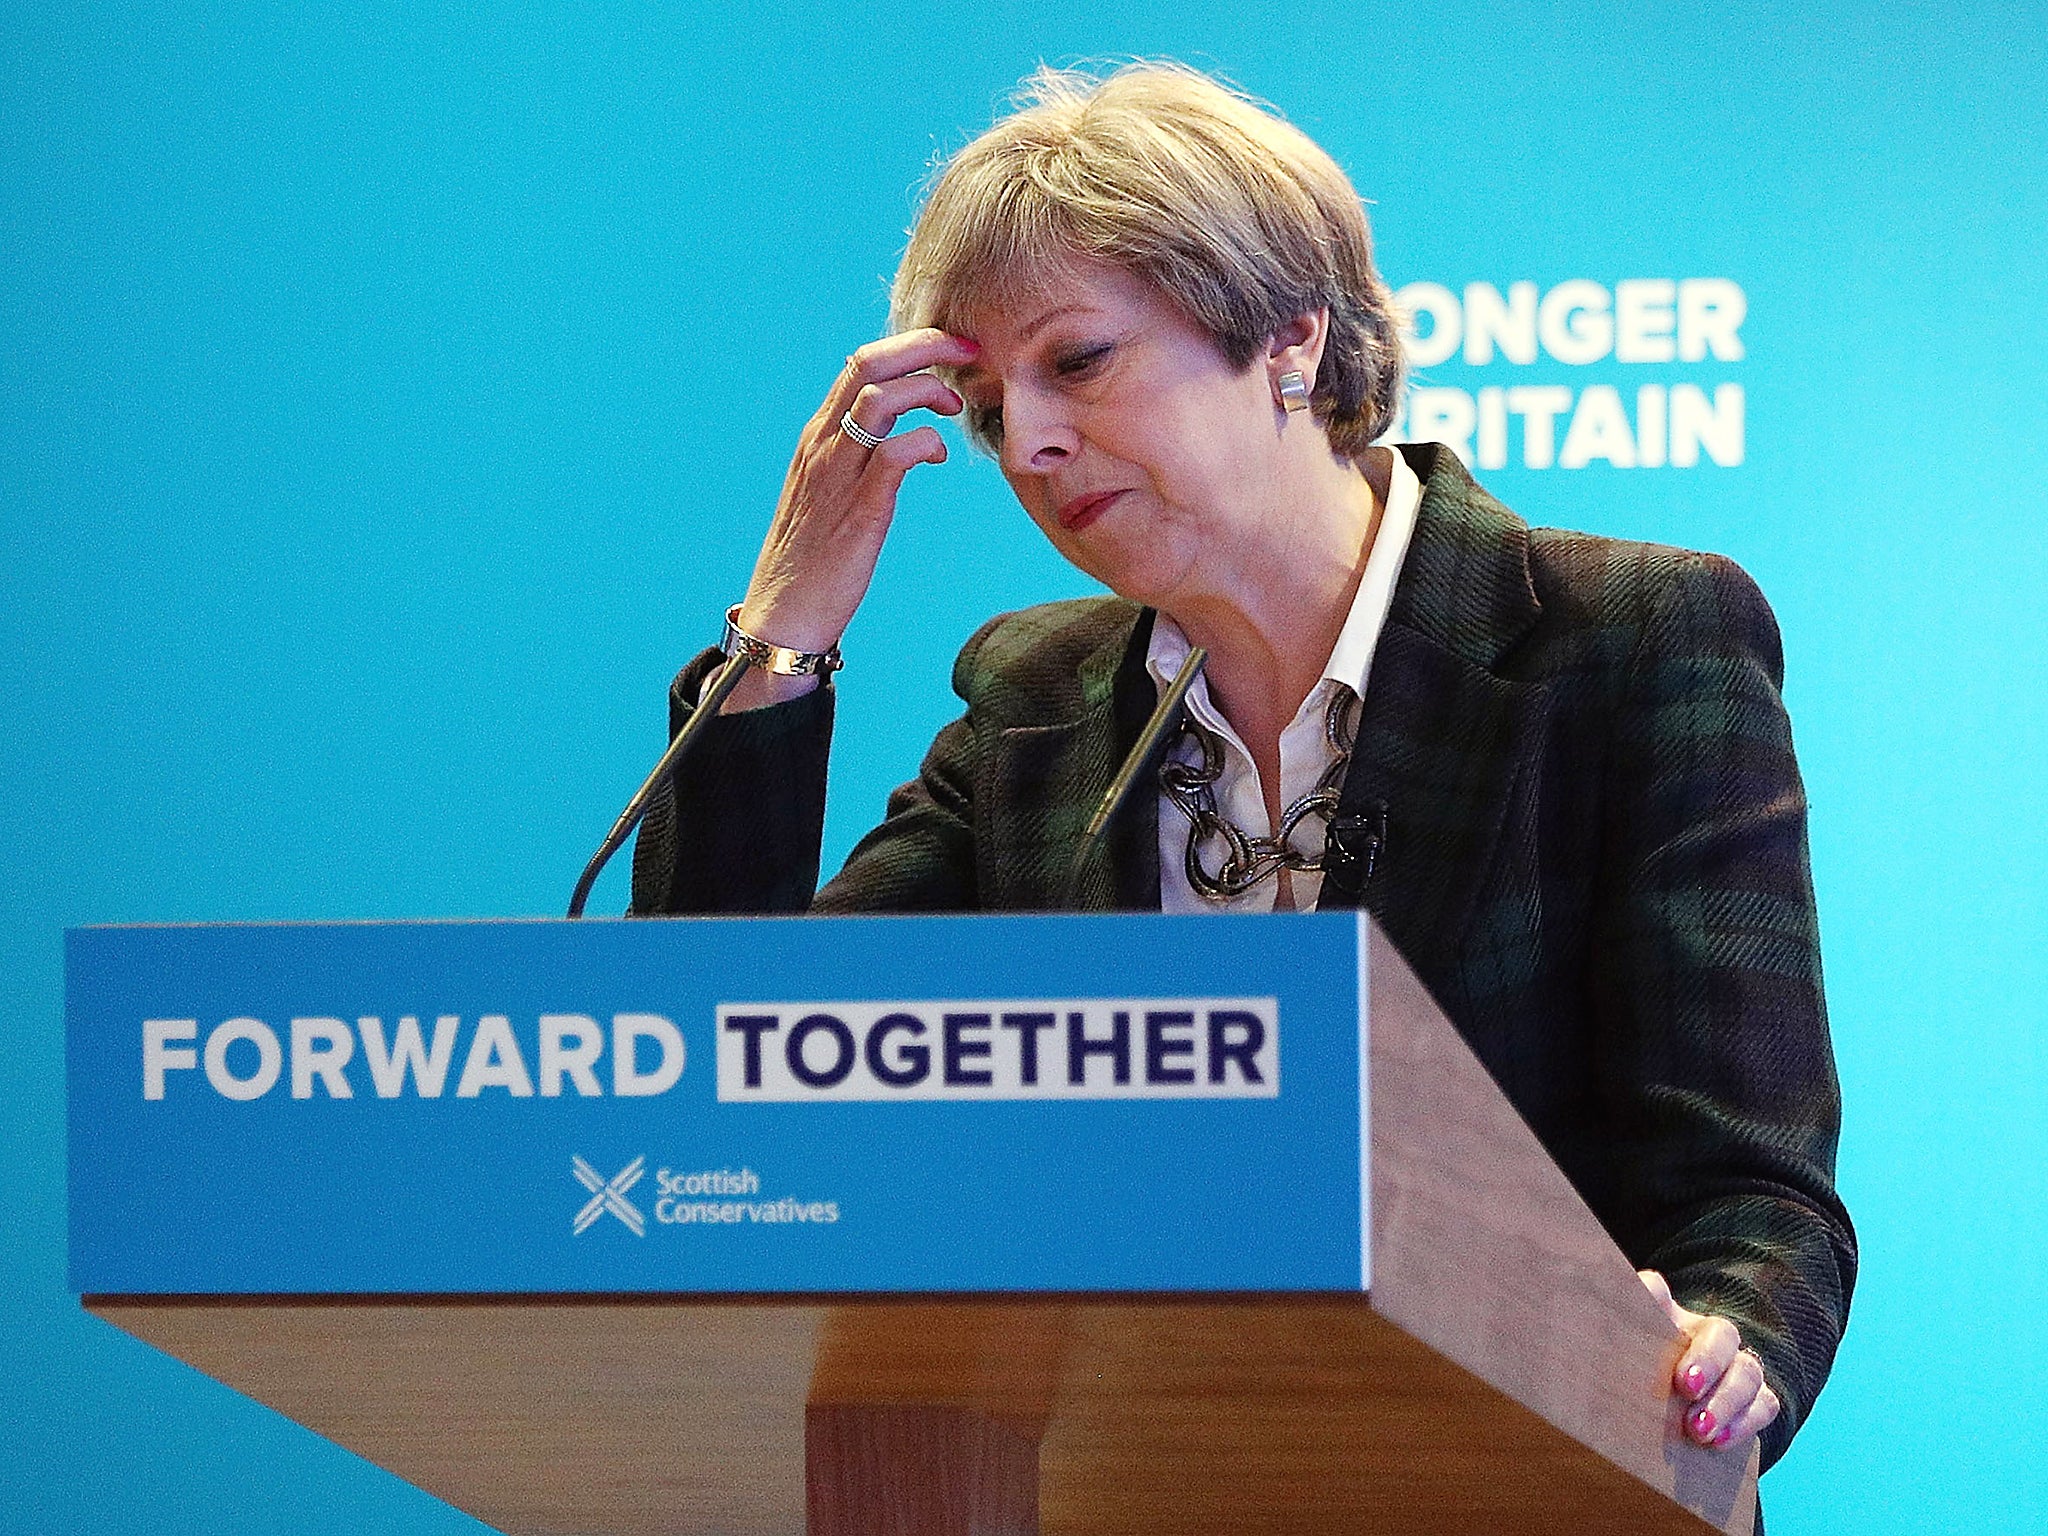 Britain's Prime Minister Theresa May speaks at the launch of the Scottish manifesto by Scottish Conservative leader Ruth Davidson in Edinburgh